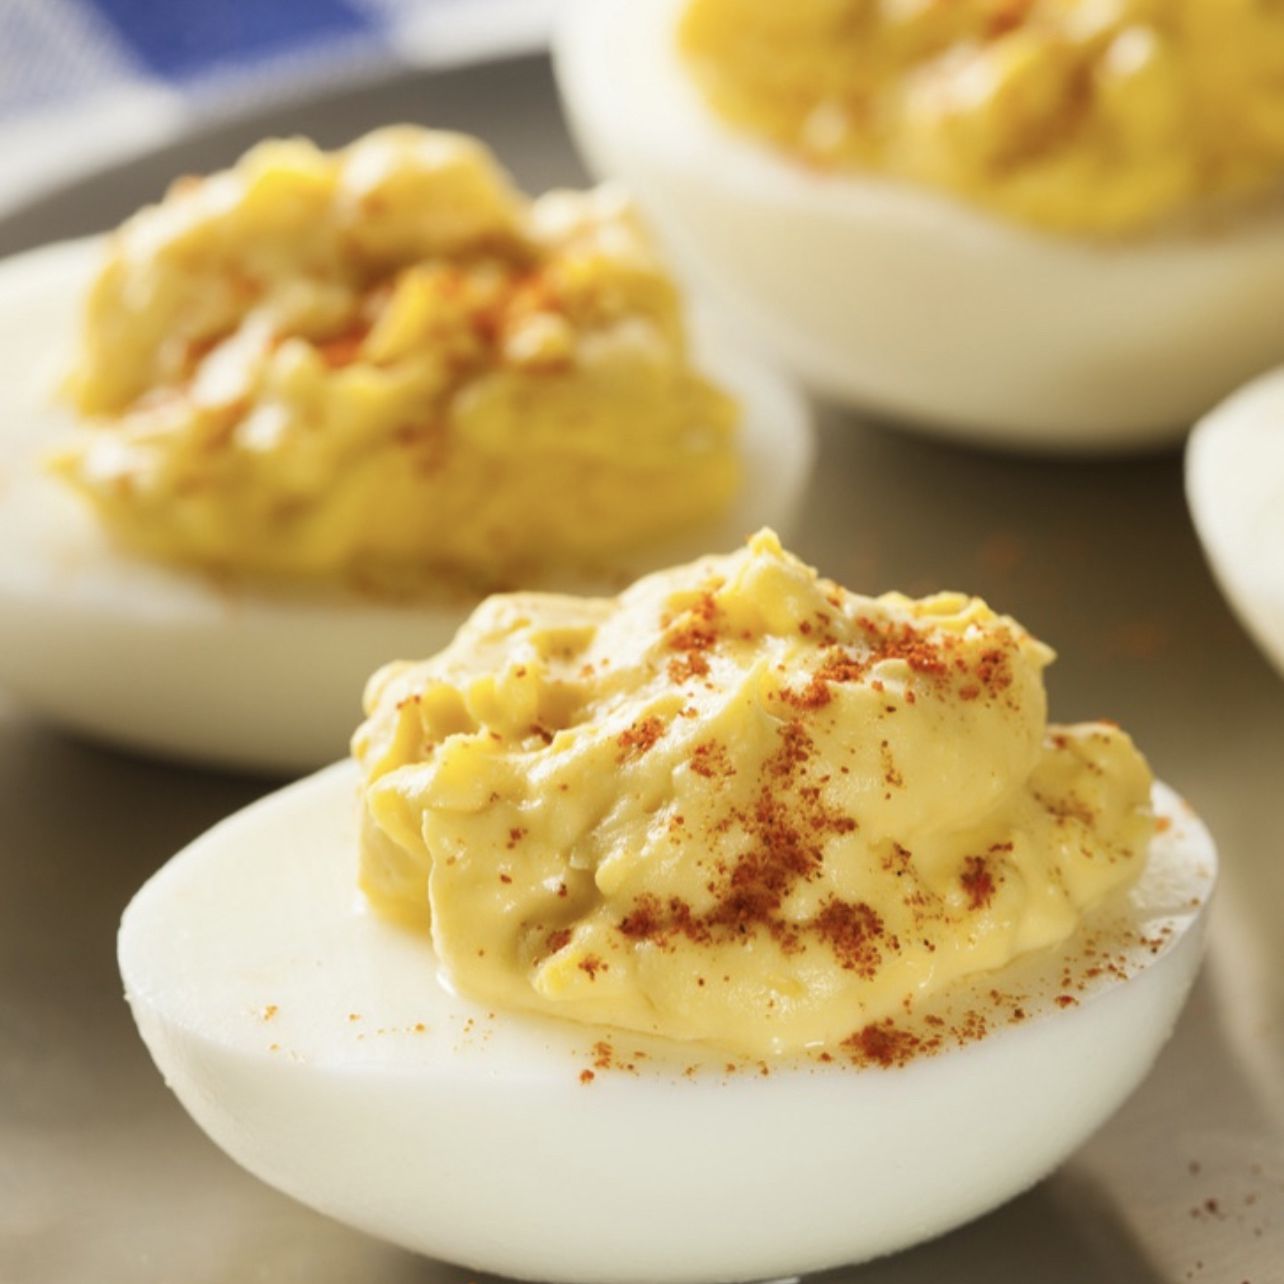 a close up, profile view of perfect looking deviled eggs.